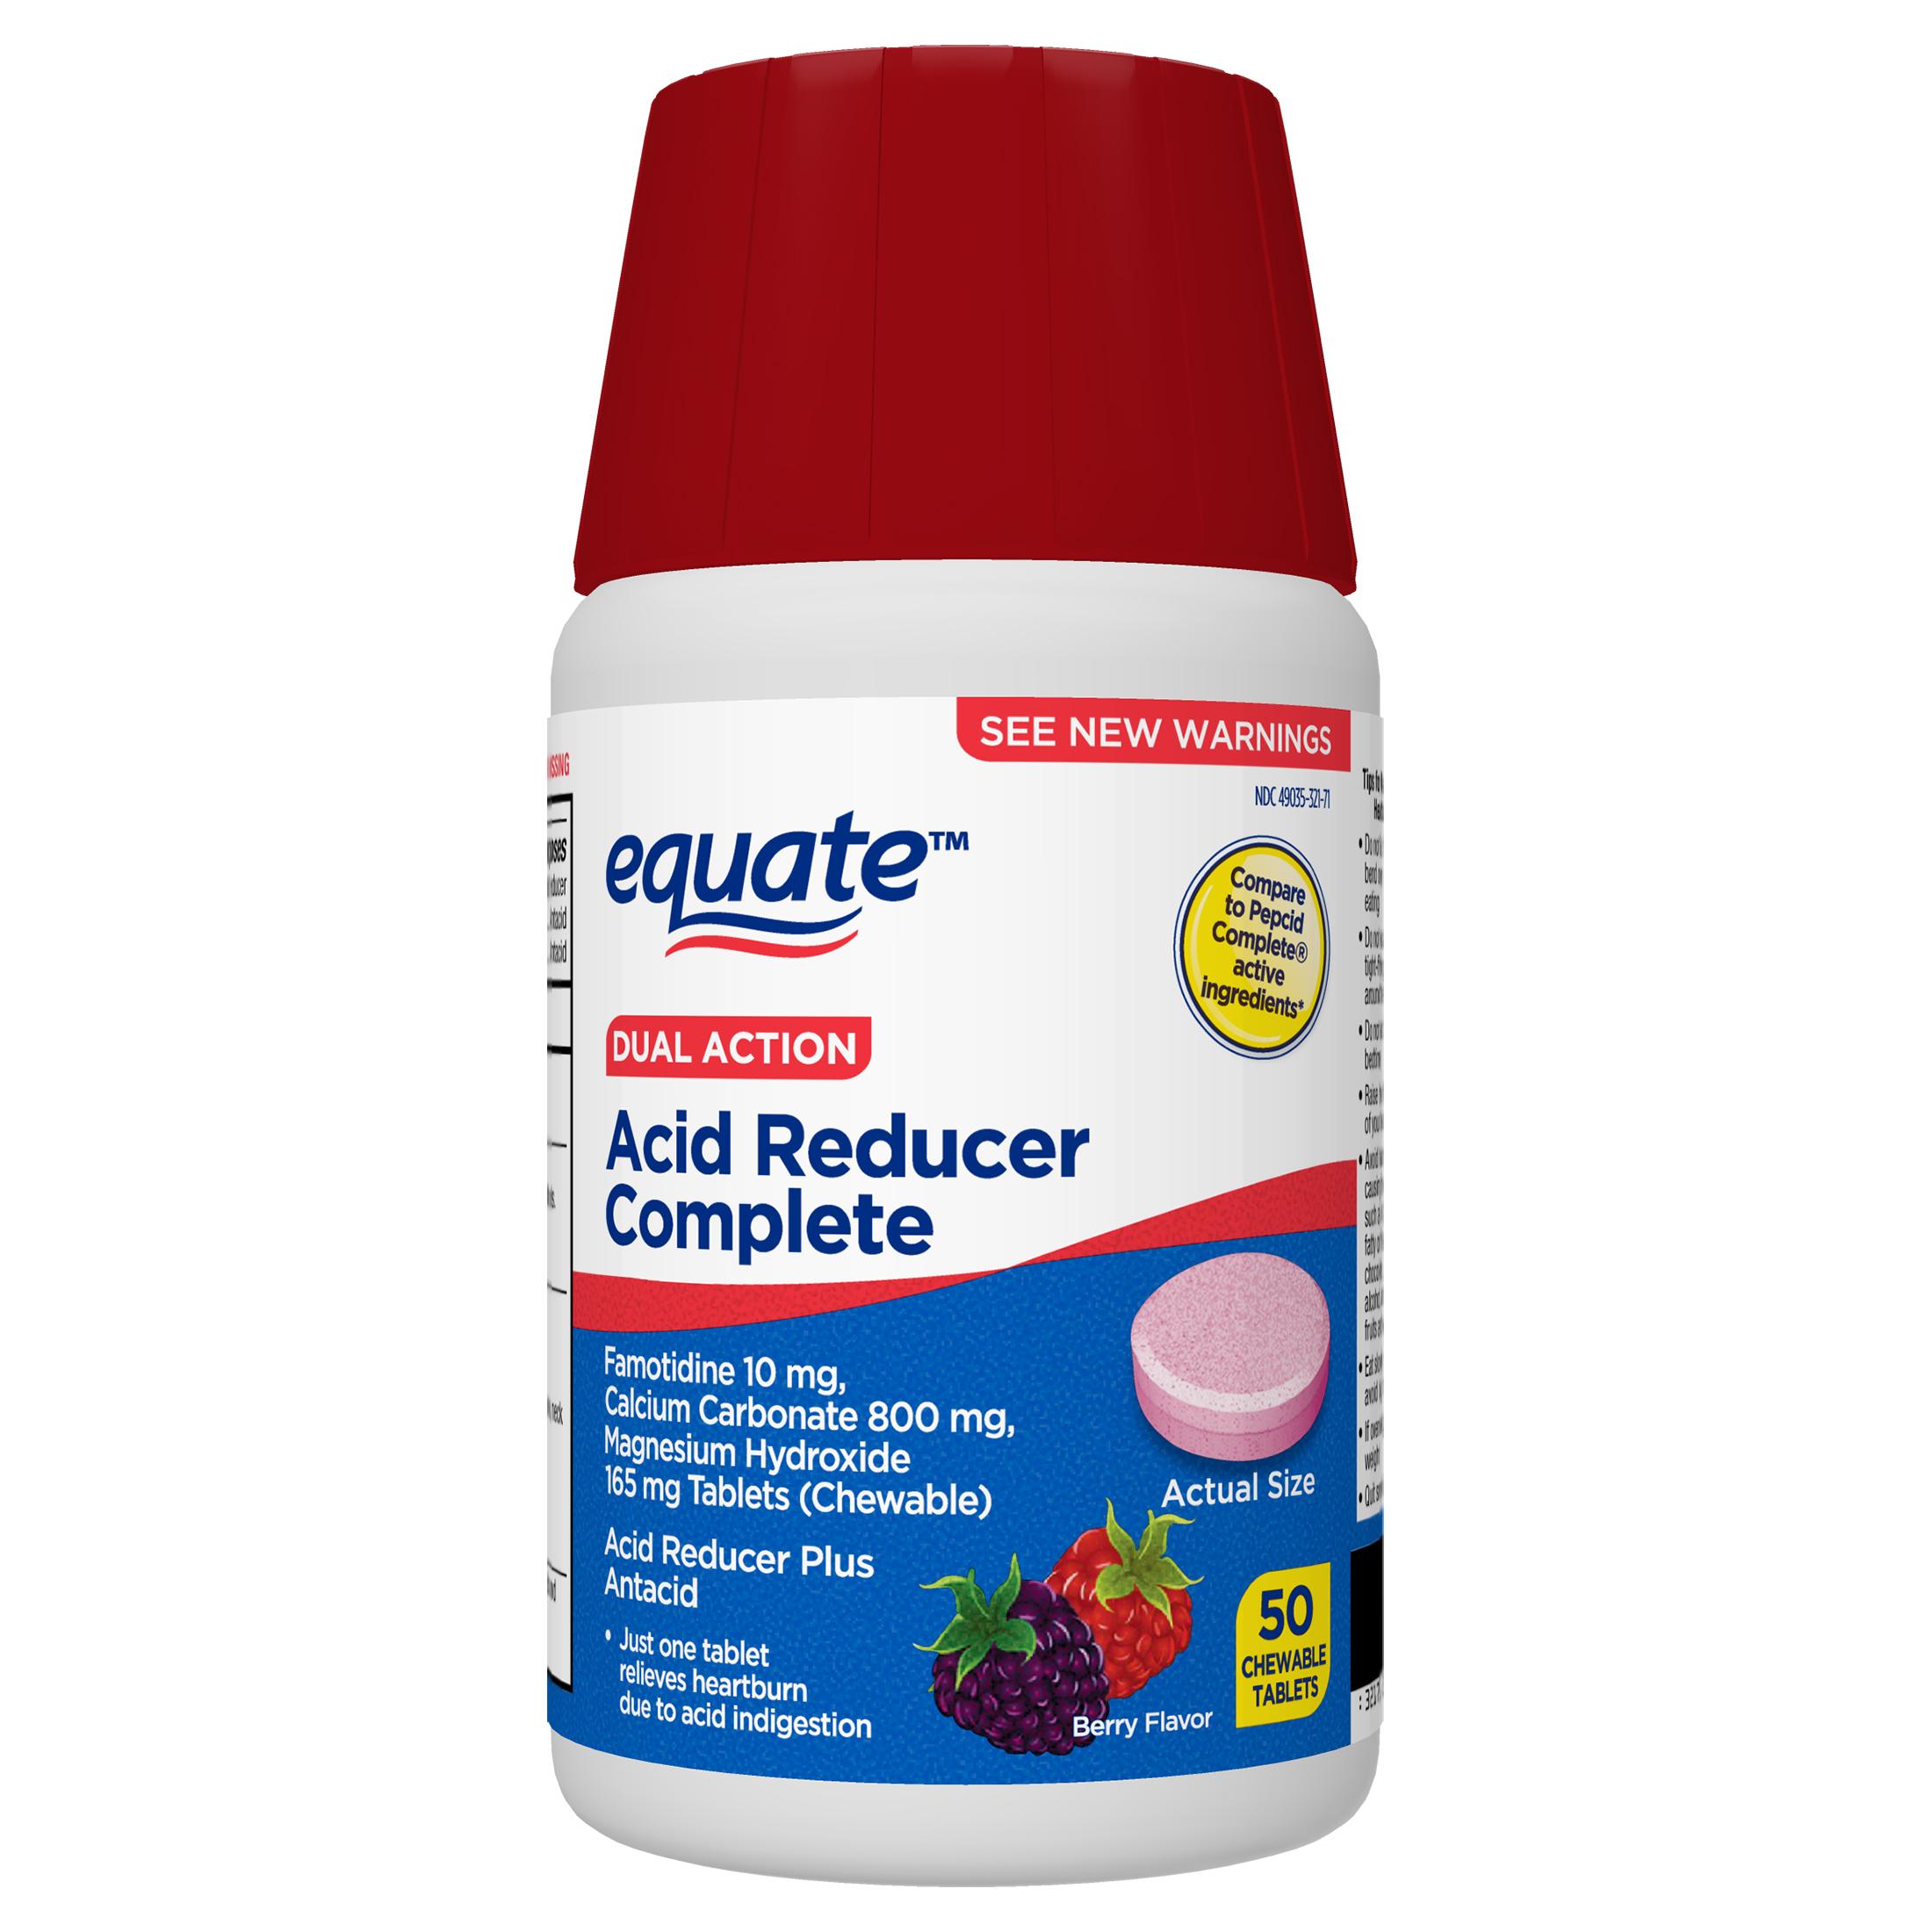 Equate Dual Action Acid Reducer Complete Tablets, Berry,50 Count - image 1 of 8